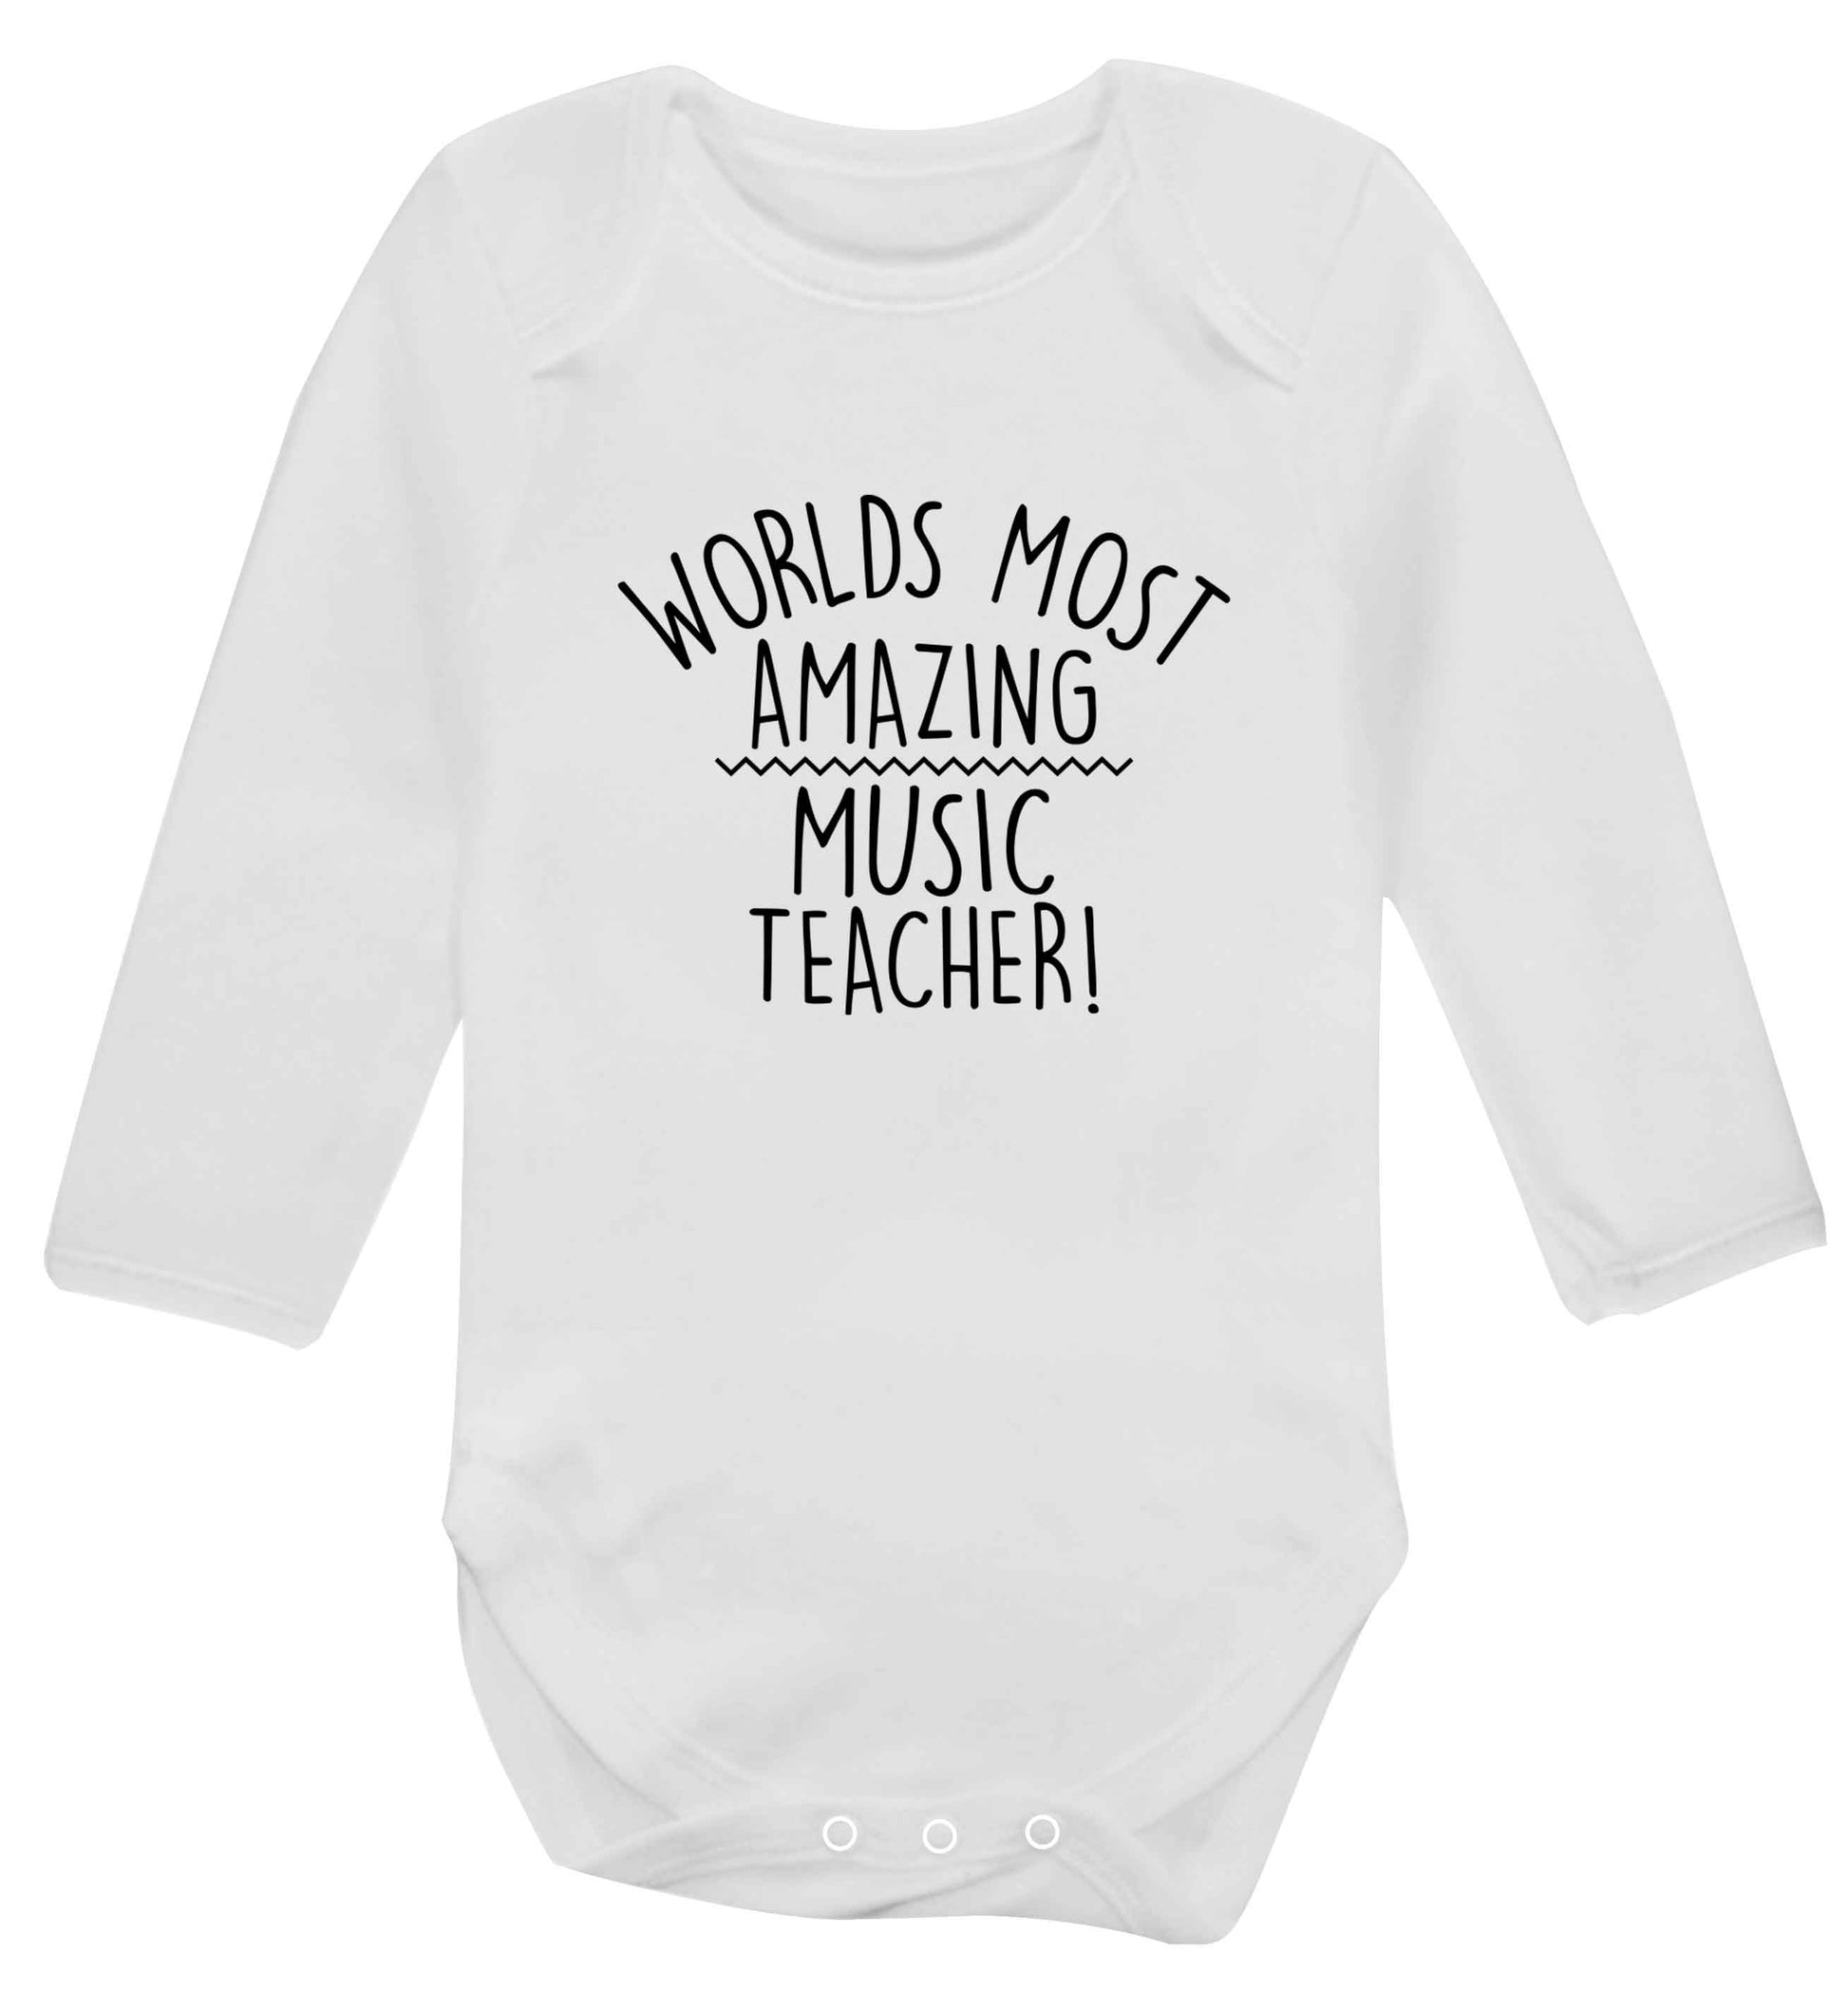 Worlds most amazing music teacher baby vest long sleeved white 6-12 months